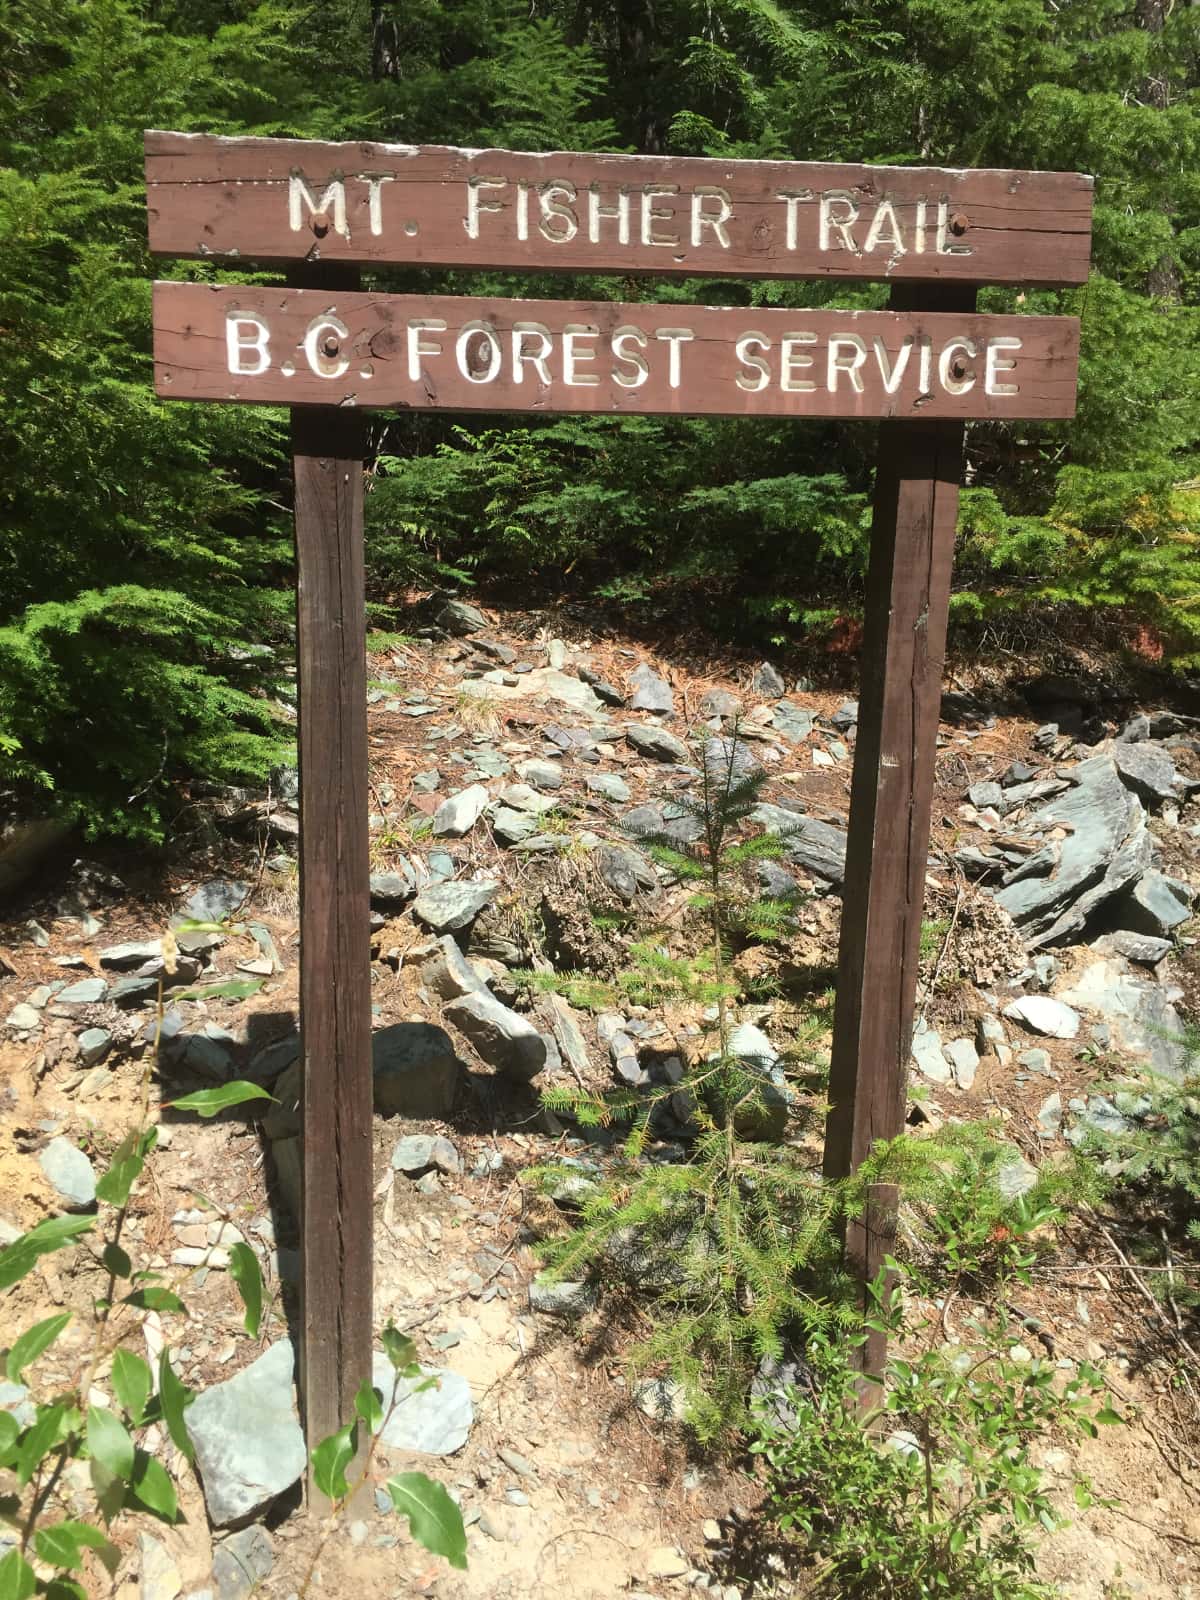 Mount Fisher trail wooden sign